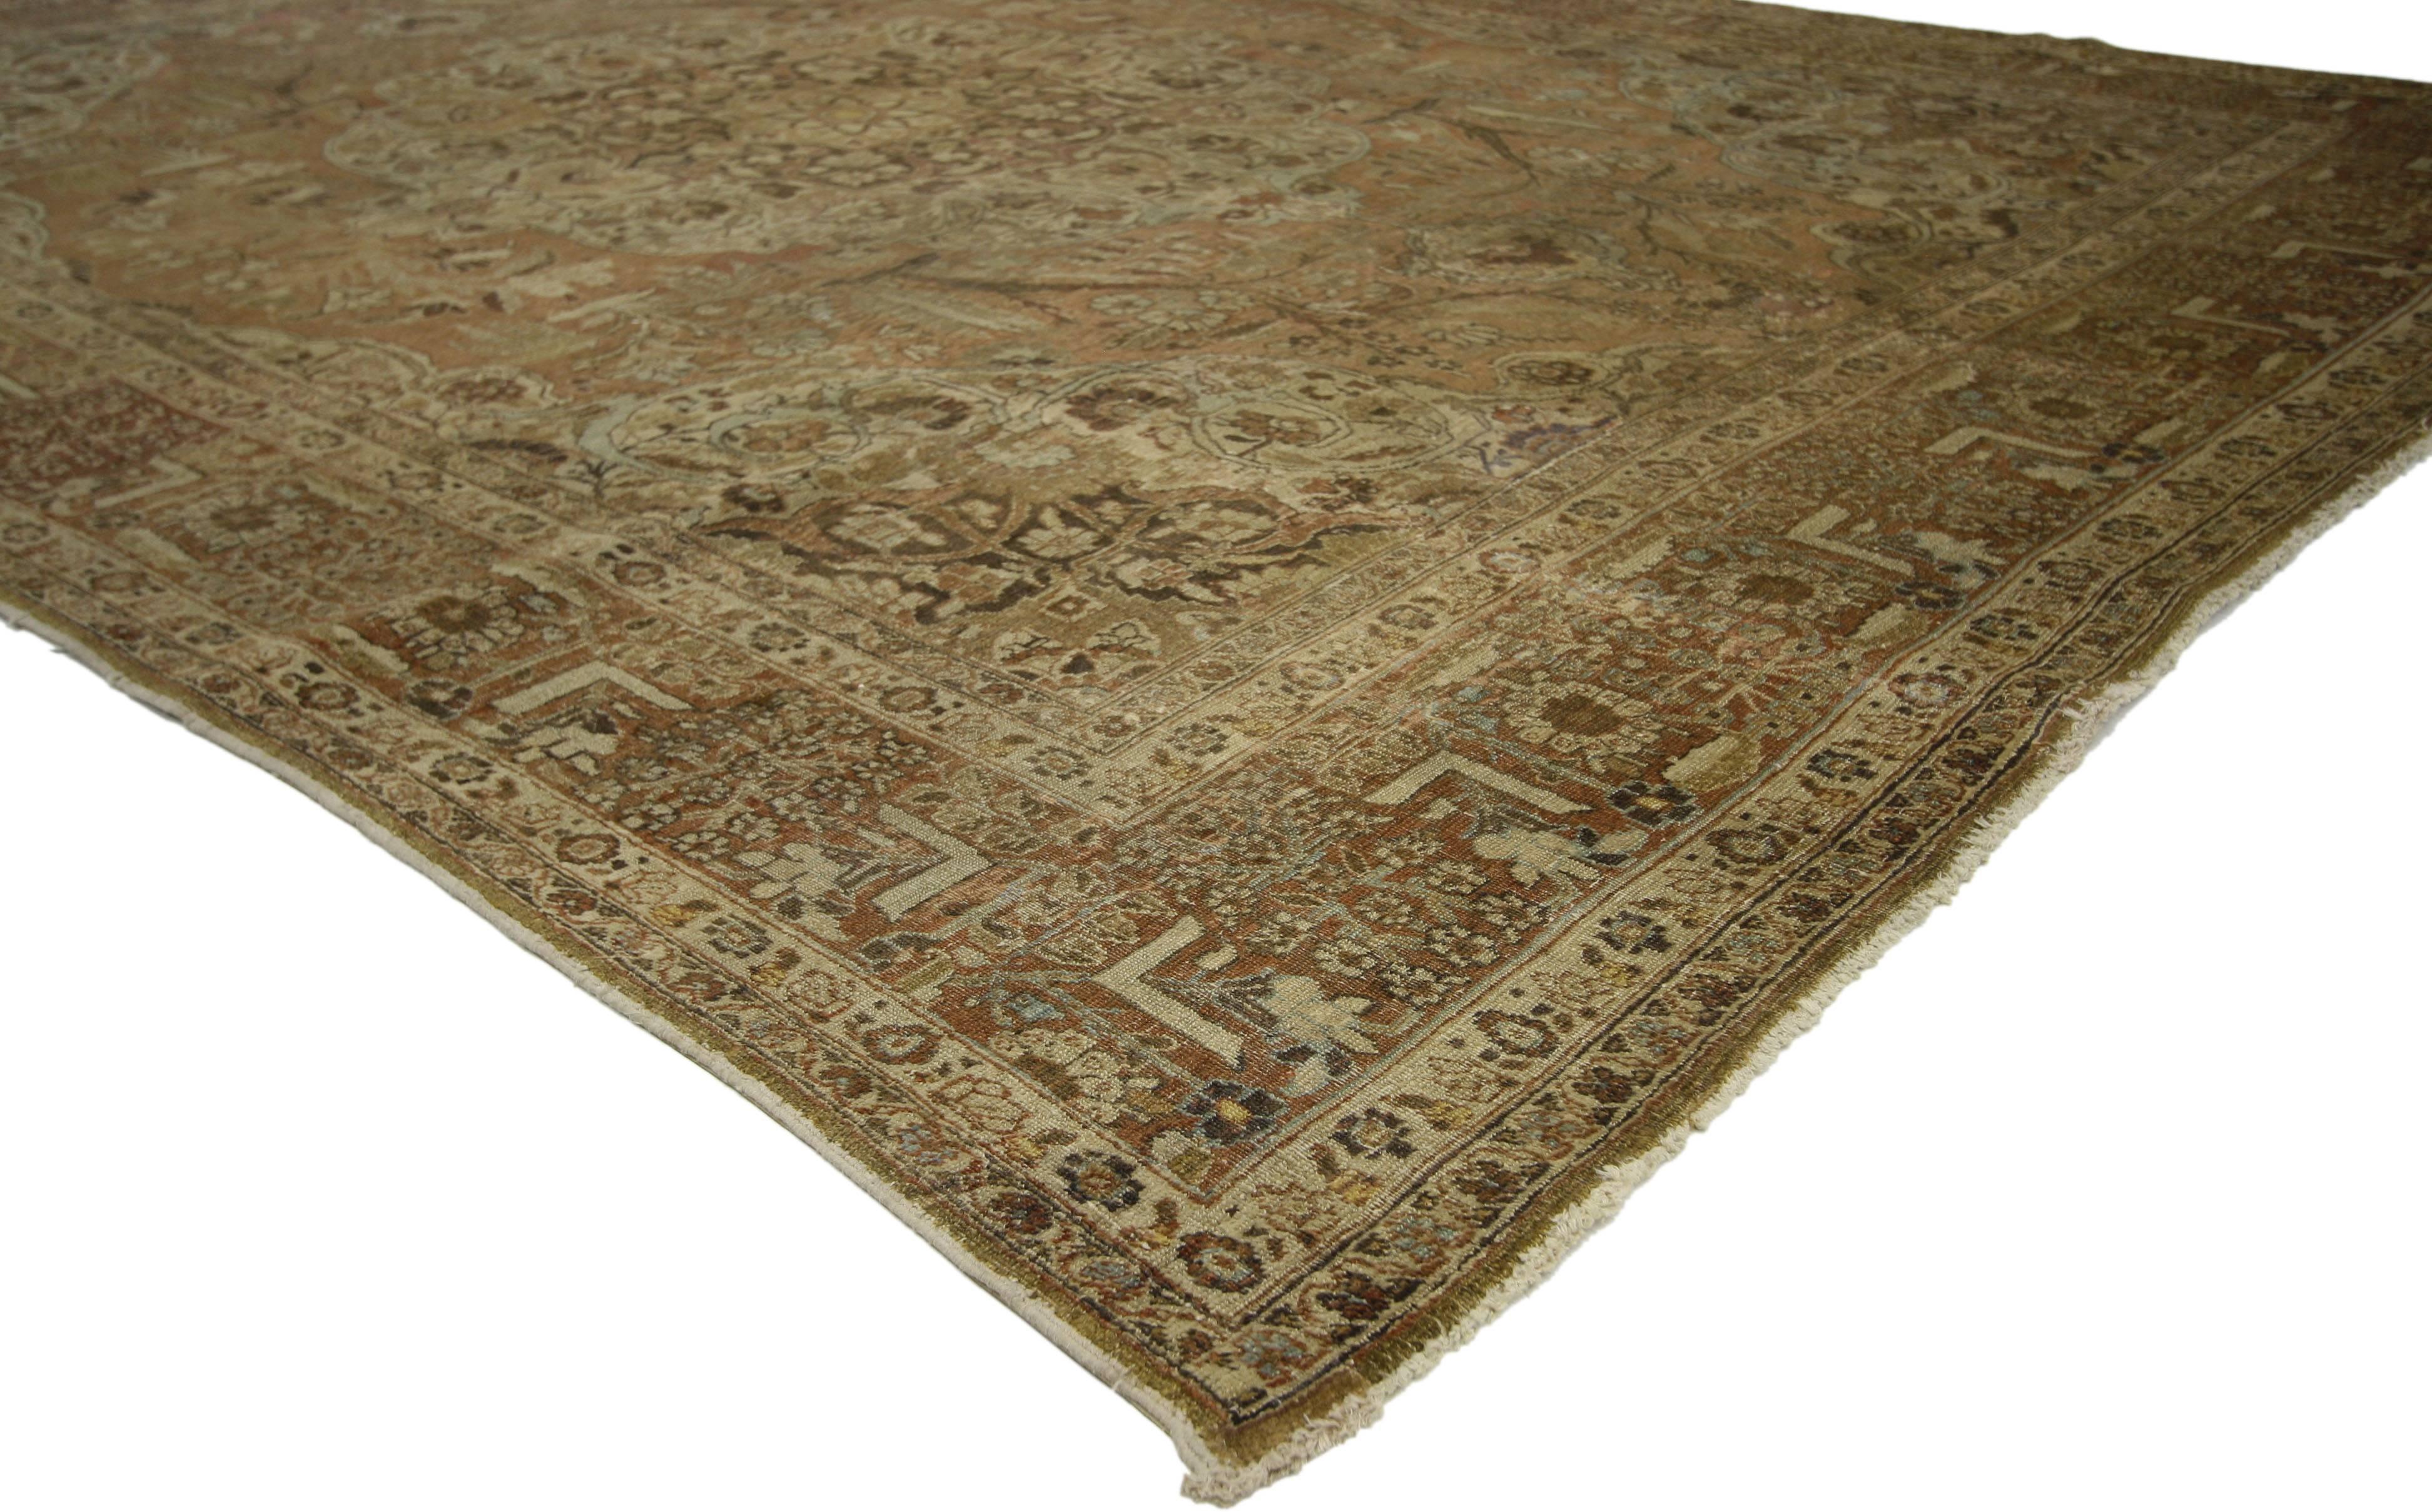 74182 Distressed Antique Persian Tabriz Rug with Rustic English Traditional Style 08'00 x 11'05. Balancing architectural elements of naturalistic forms with traditional sensibility and a lovingly timeworn patina, this hand knotted wool distressed